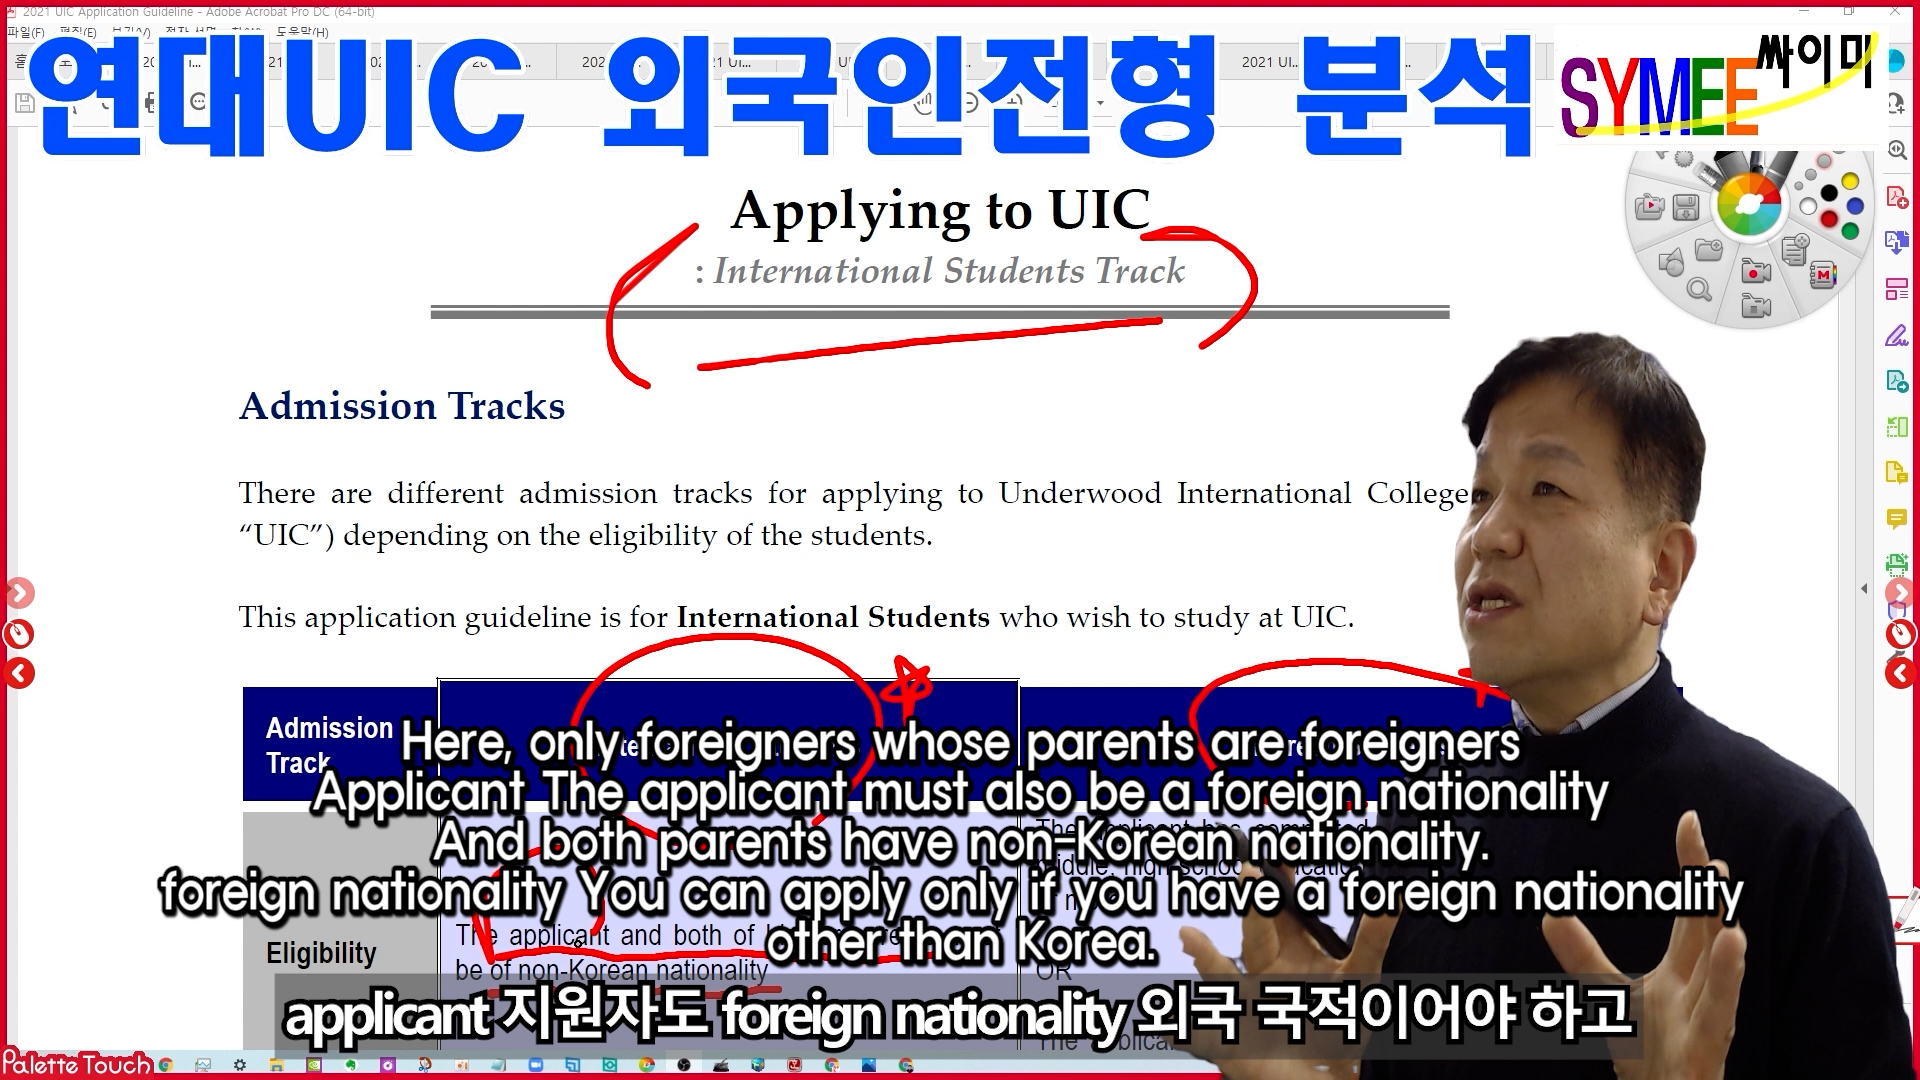 Yonsei Univ. Admission for UIC for Foreign Student 02 Qualifications.00_01_53_00.스틸 005.jpg